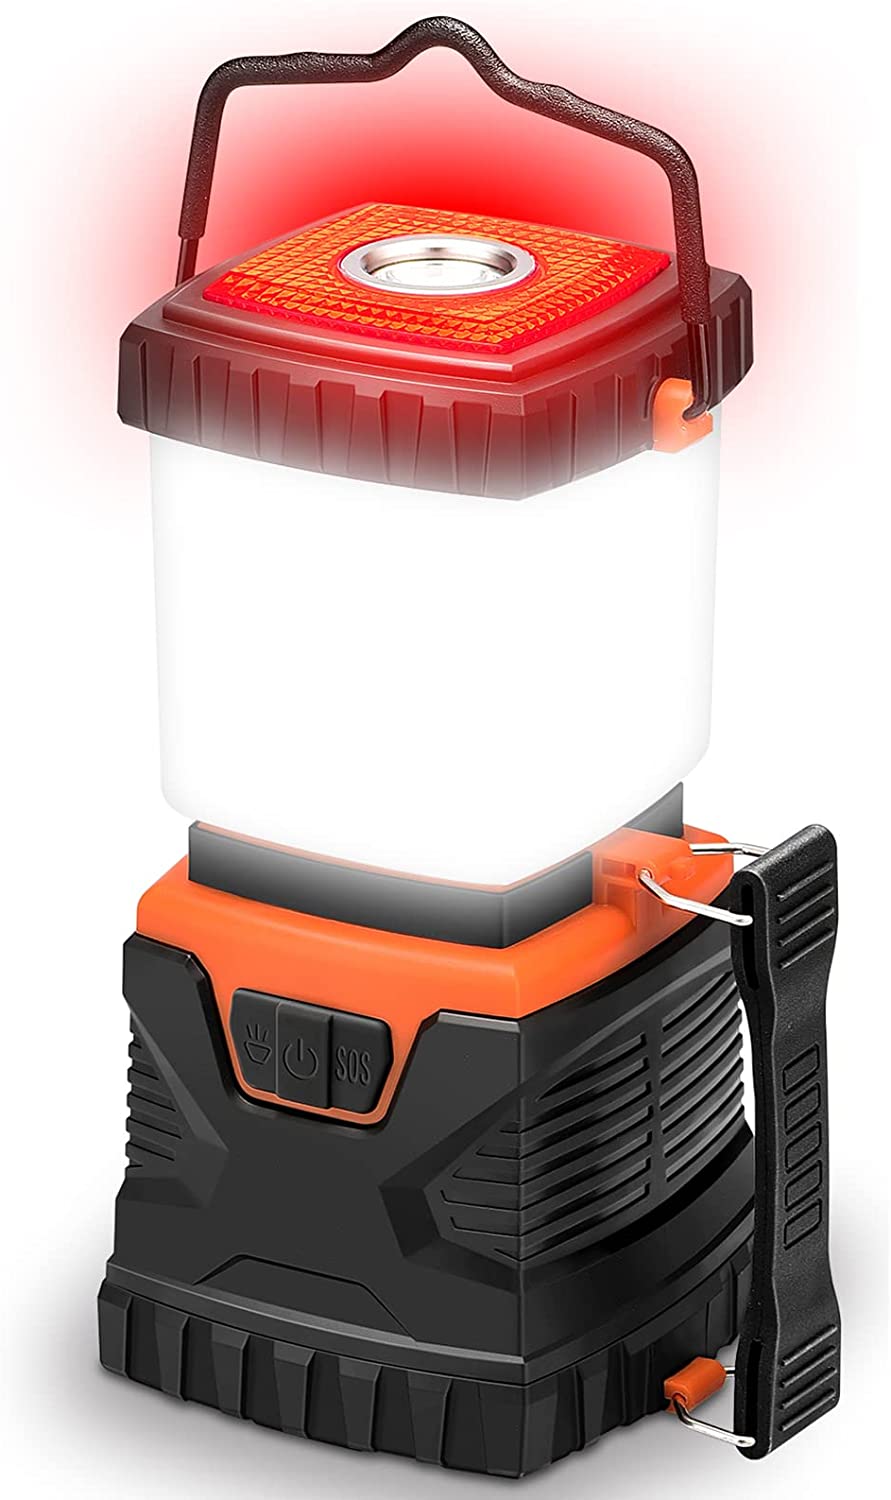 LED Camping Lanterns Battery Powered – Wsky High Lumen Portable Waterproof Tents Latern Flashlight for Outdoor Hiking Emergency Hurricane and Home (Not Included Batteries)